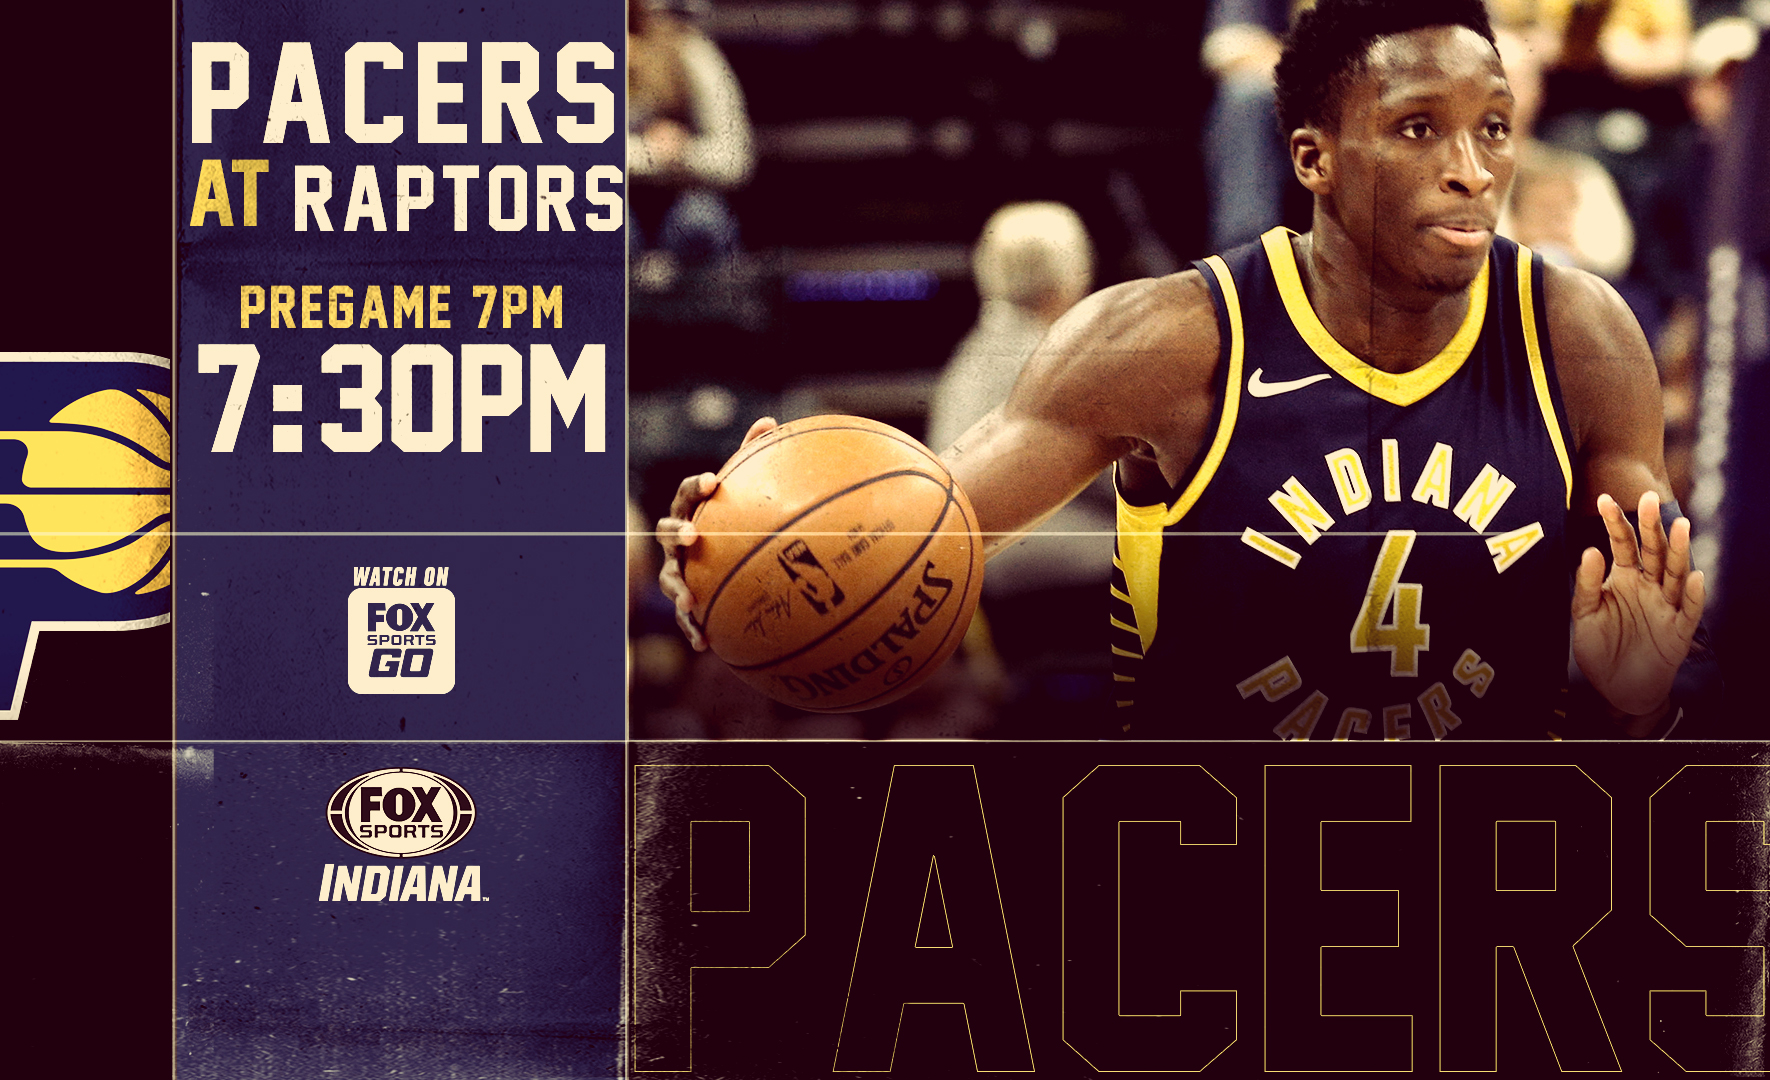 Pacers will try to inflict more third-quarter woes on Raptors